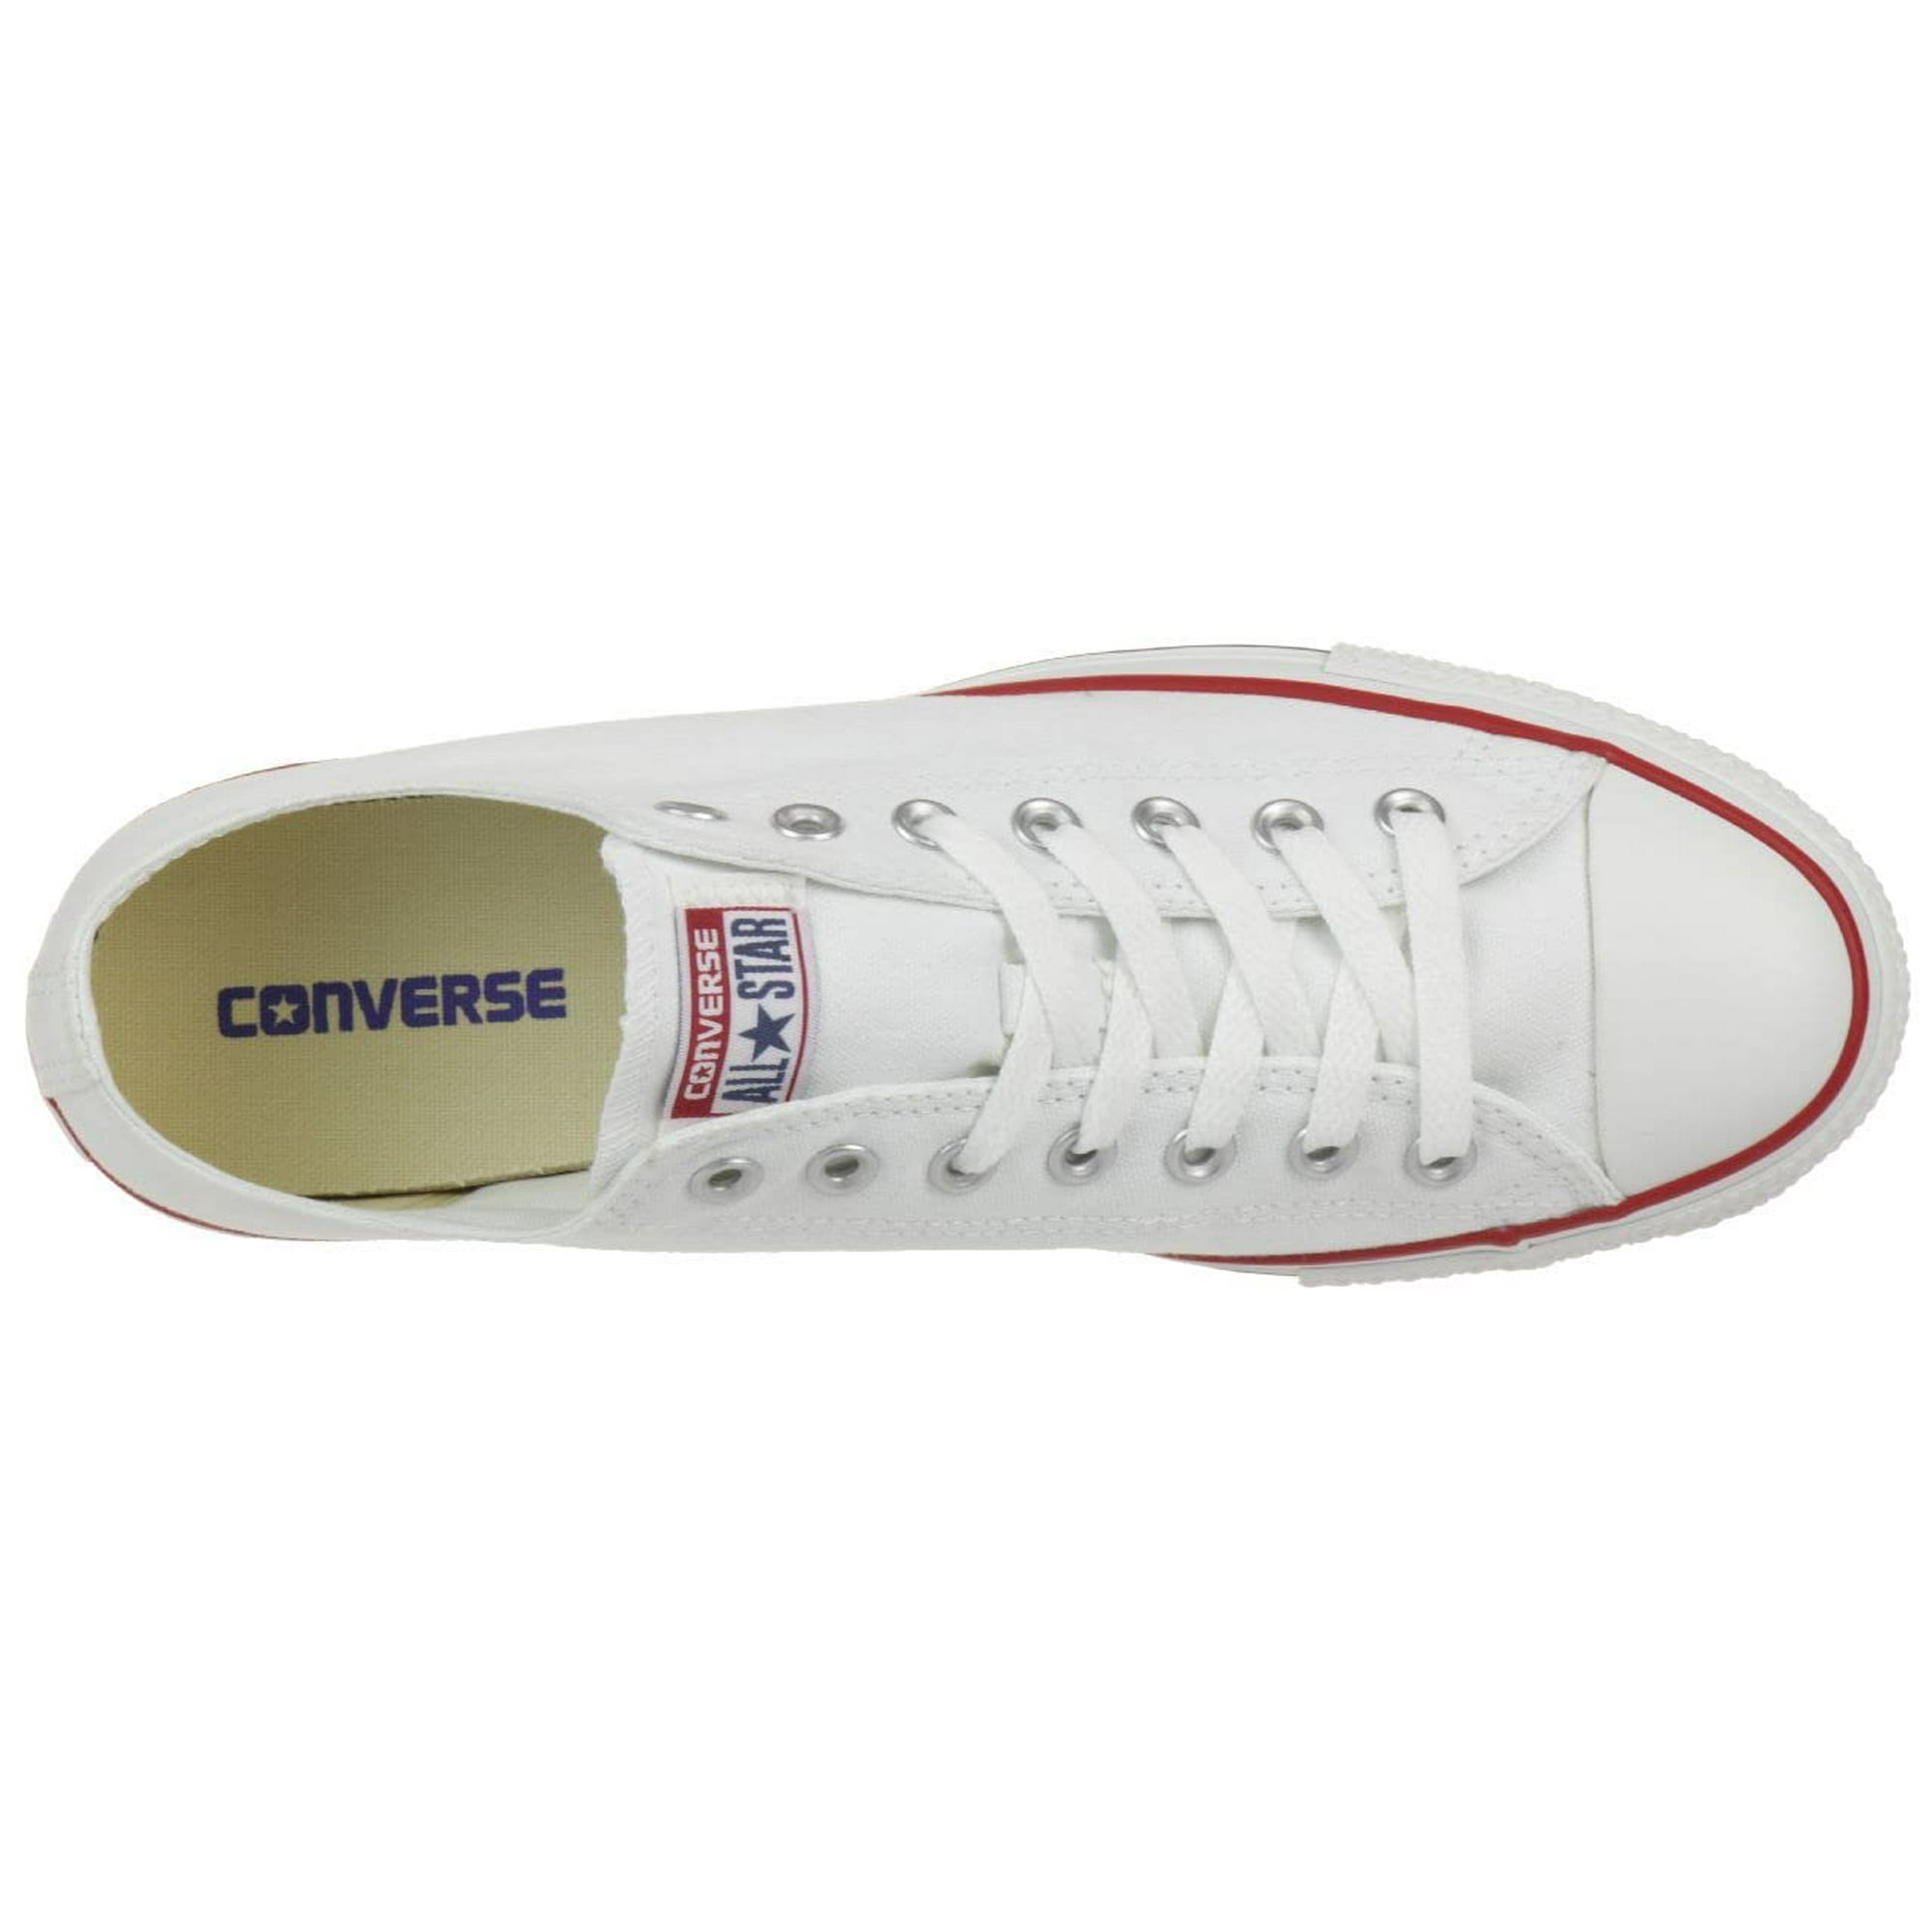 Vært for Addition Hover Converse Womens all star core ox Canvas Low Top Lace | Walmart Canada